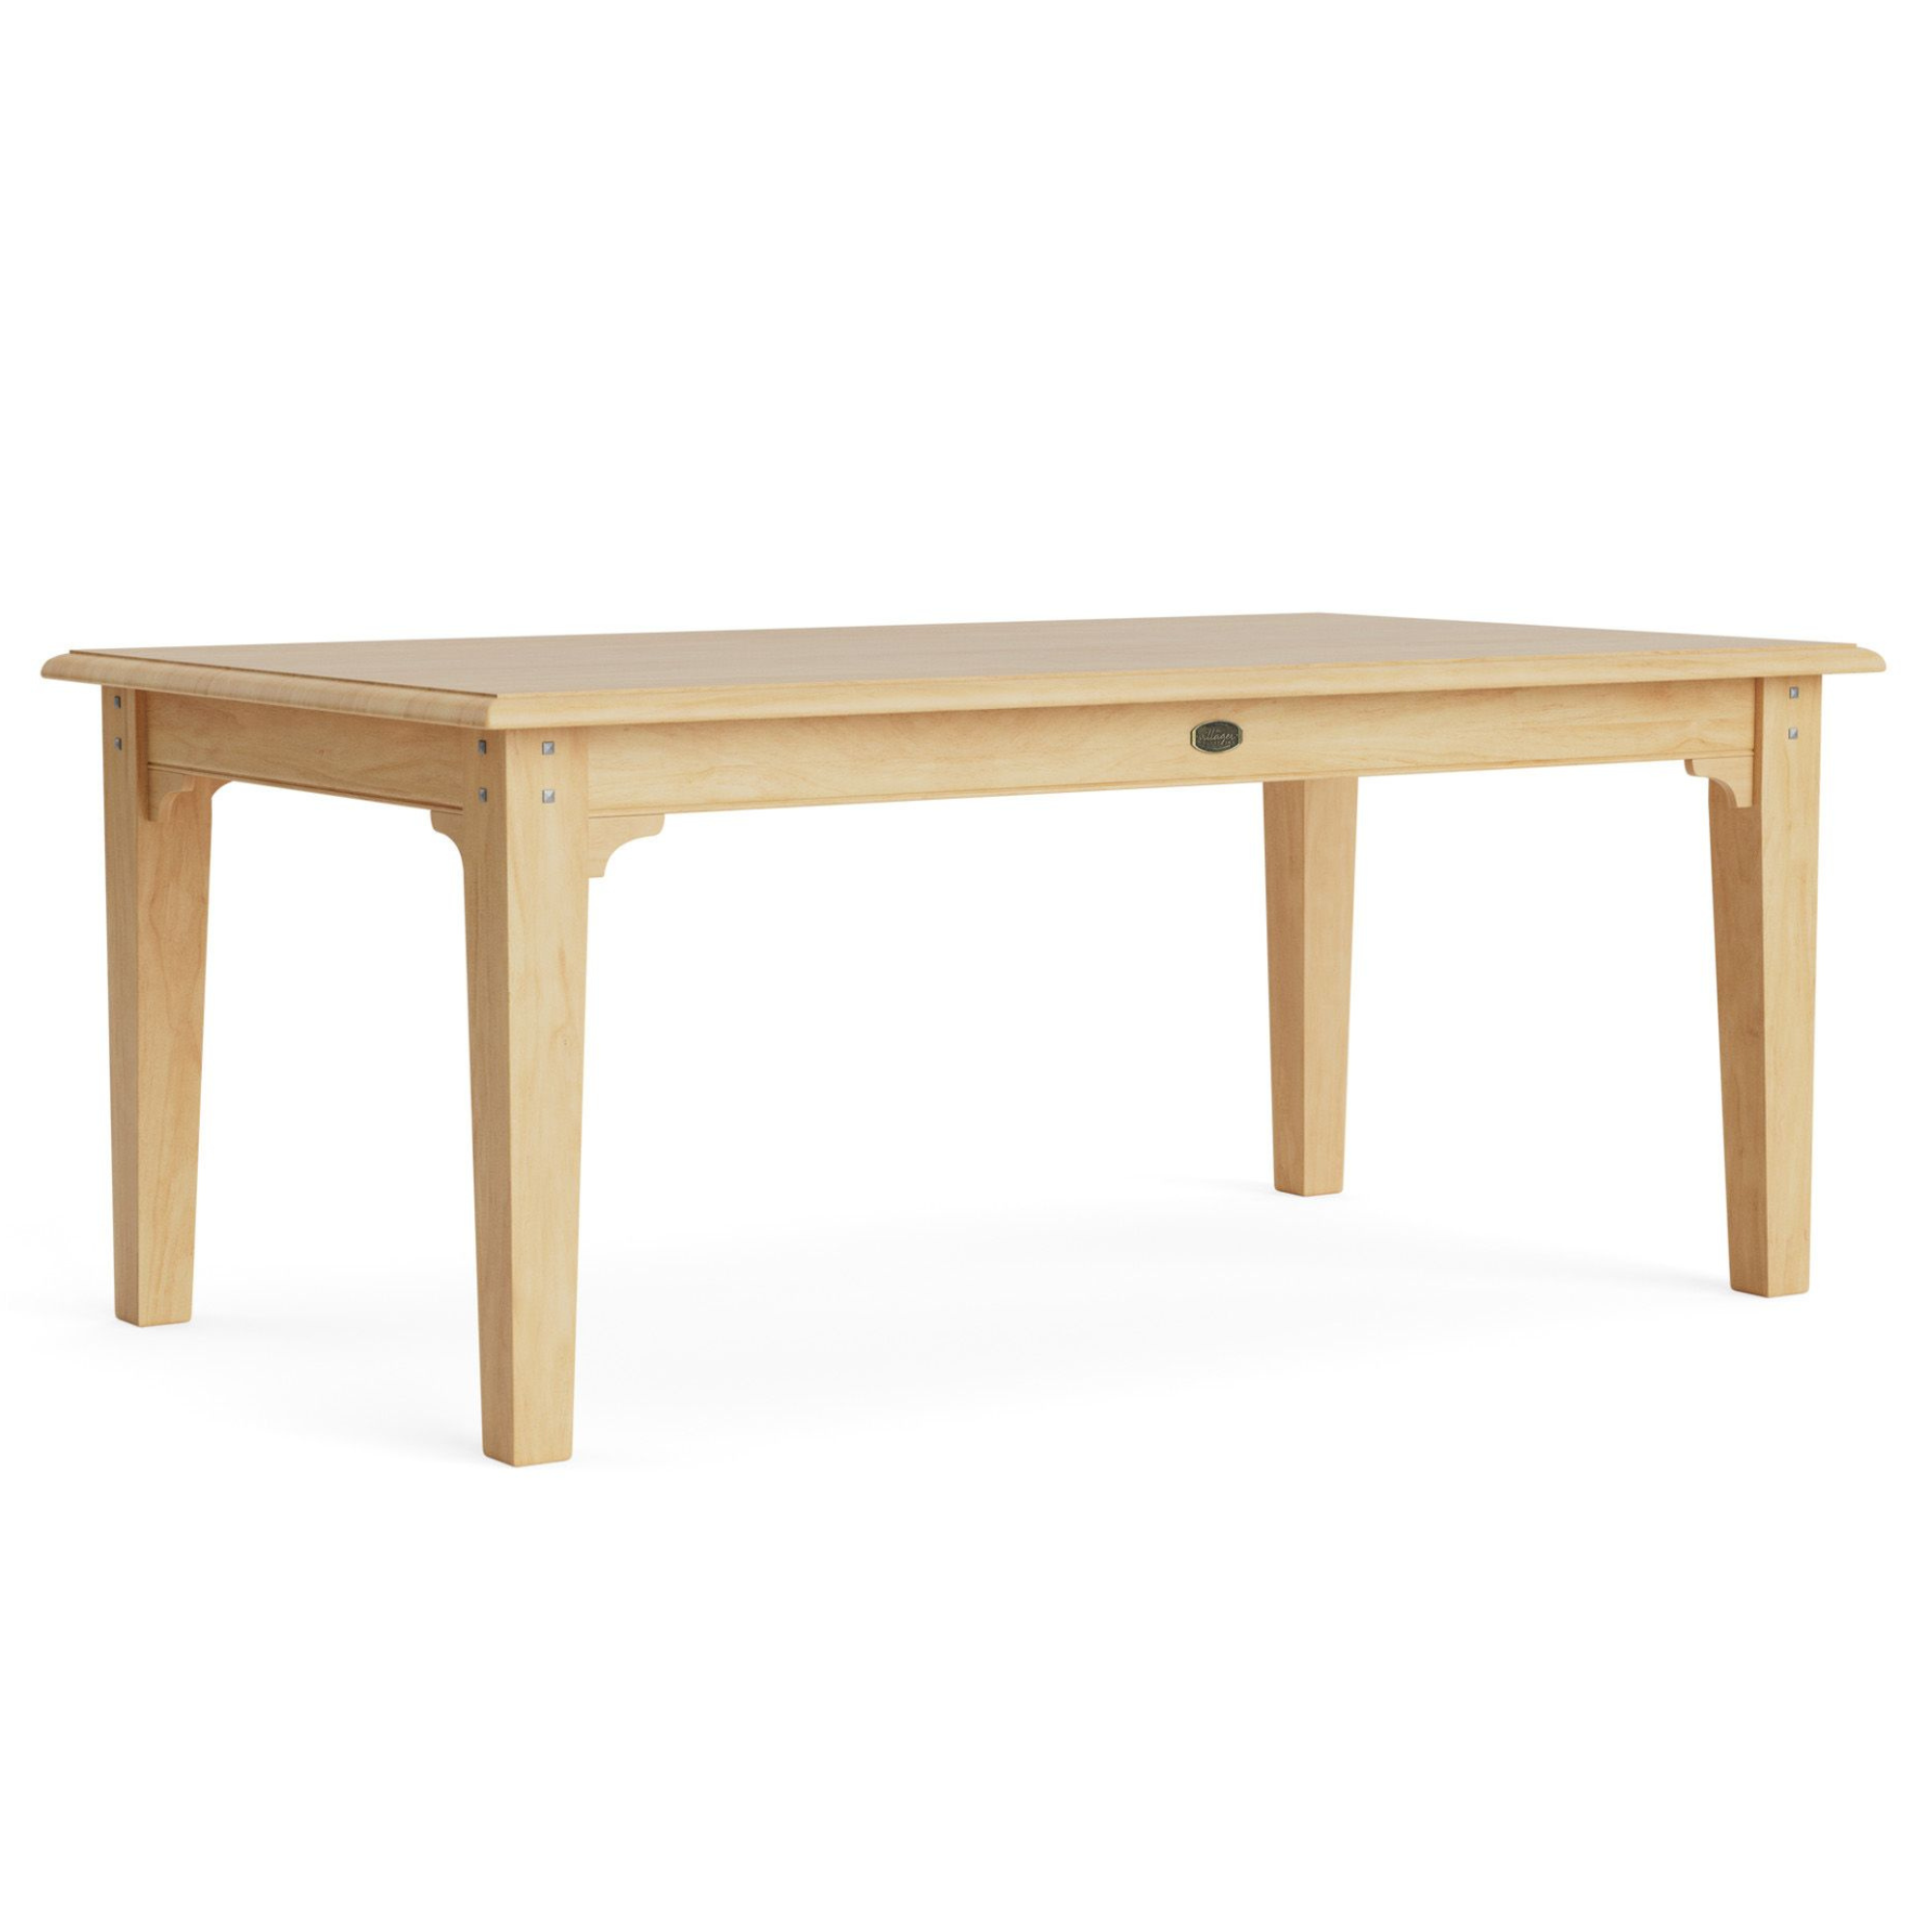 VILLAGER 1800 x 1050 DINING TABLE TABLE | NZ MADE